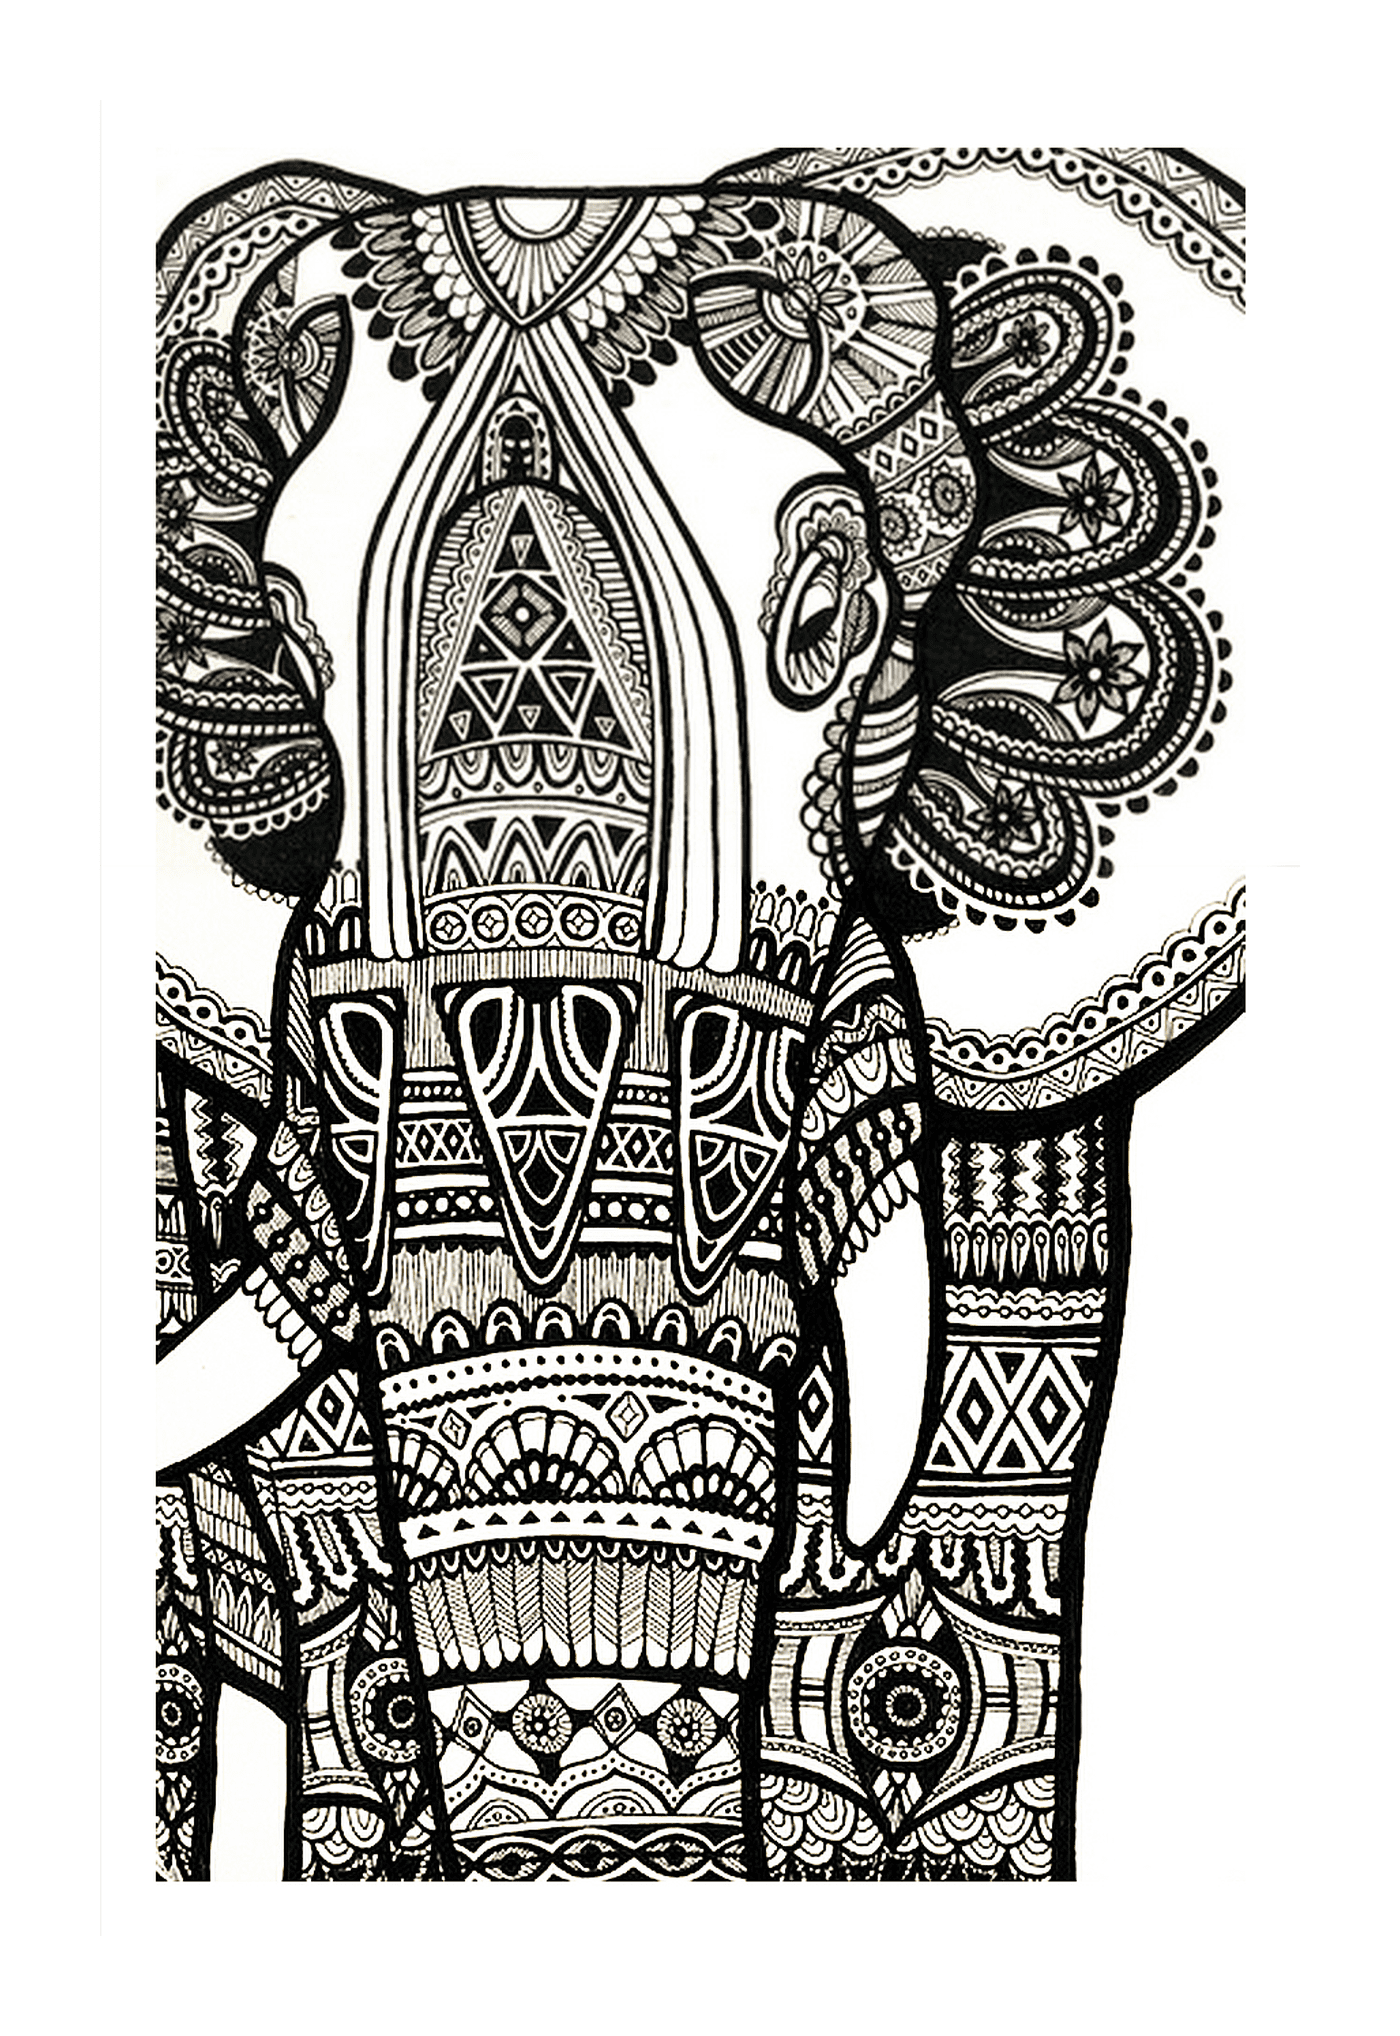  A complex drawing with an Indian elephant 